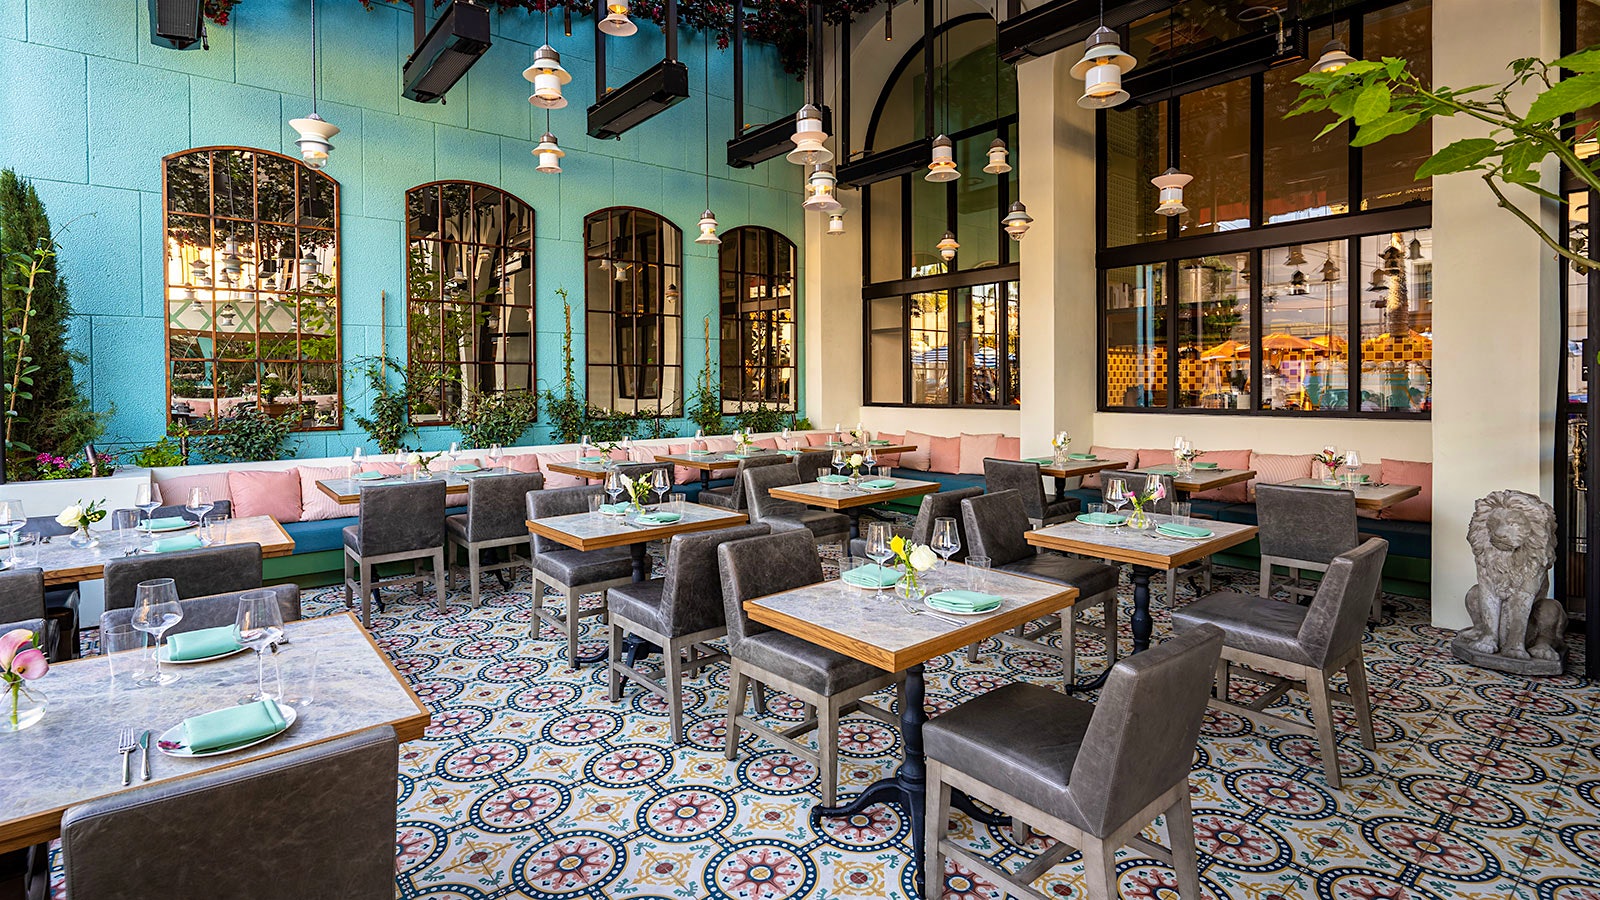  A dining room at Marisi with one aqua wall, pink-cushioned banquettes and a mosaic tiled floor